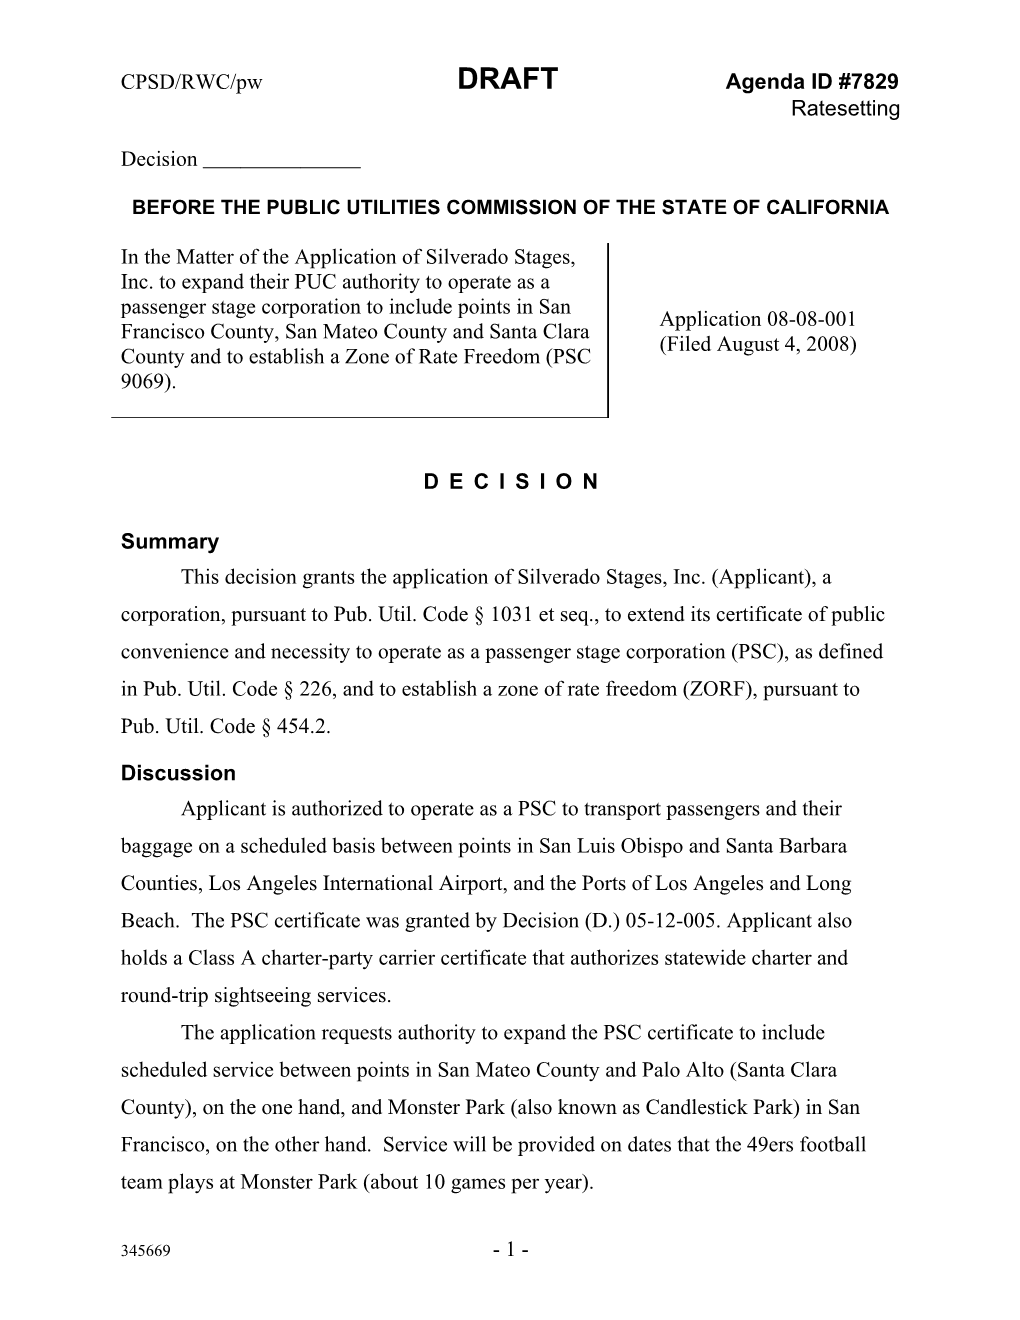 Before the Public Utilities Commission of the State of California s29